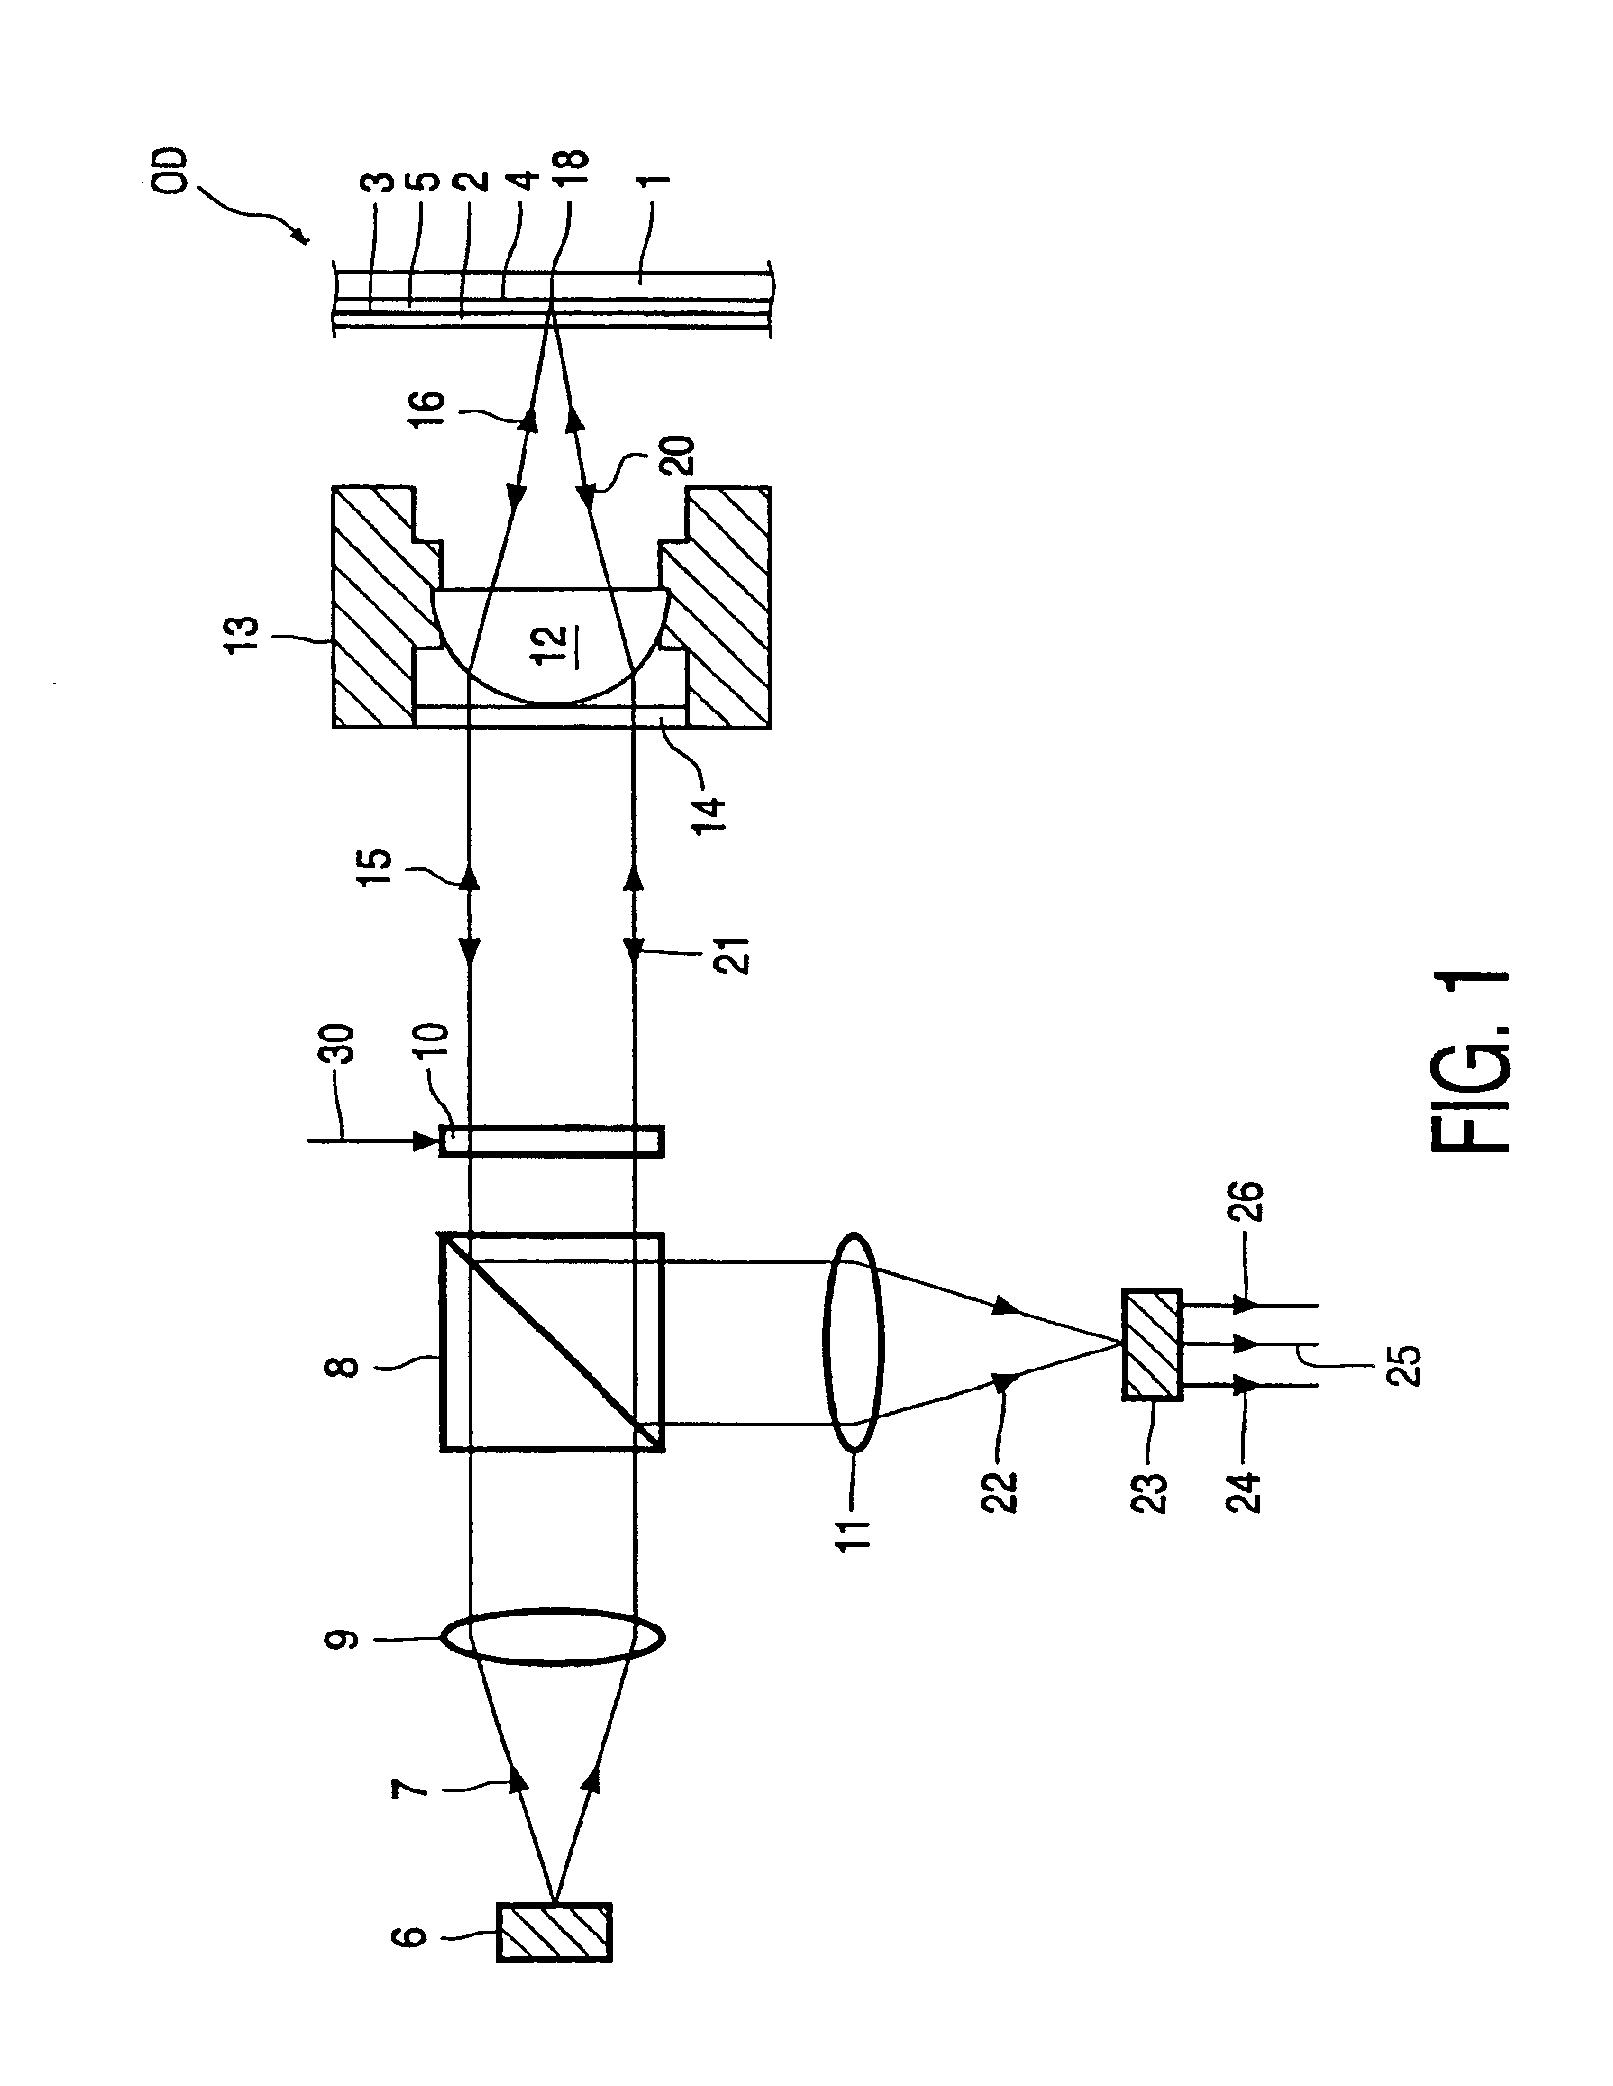 Duel-layer optical scanner with non-periodic phase structure element of birefringent material for different wavefront aberration compensation of orthogonally polarized radiation beams